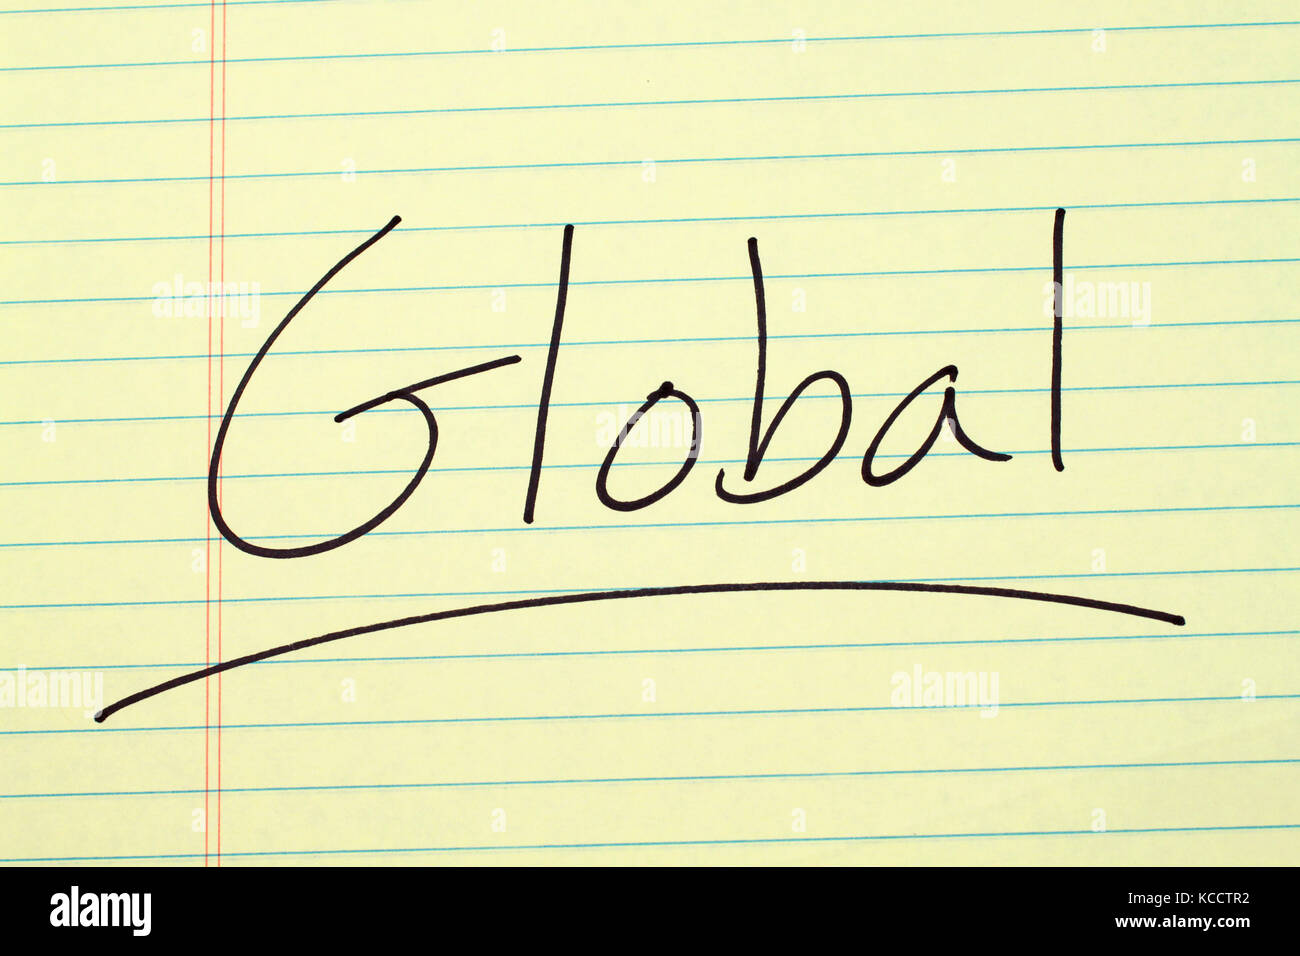 The word 'Global' underlined on a yellow legal pad Stock Photo